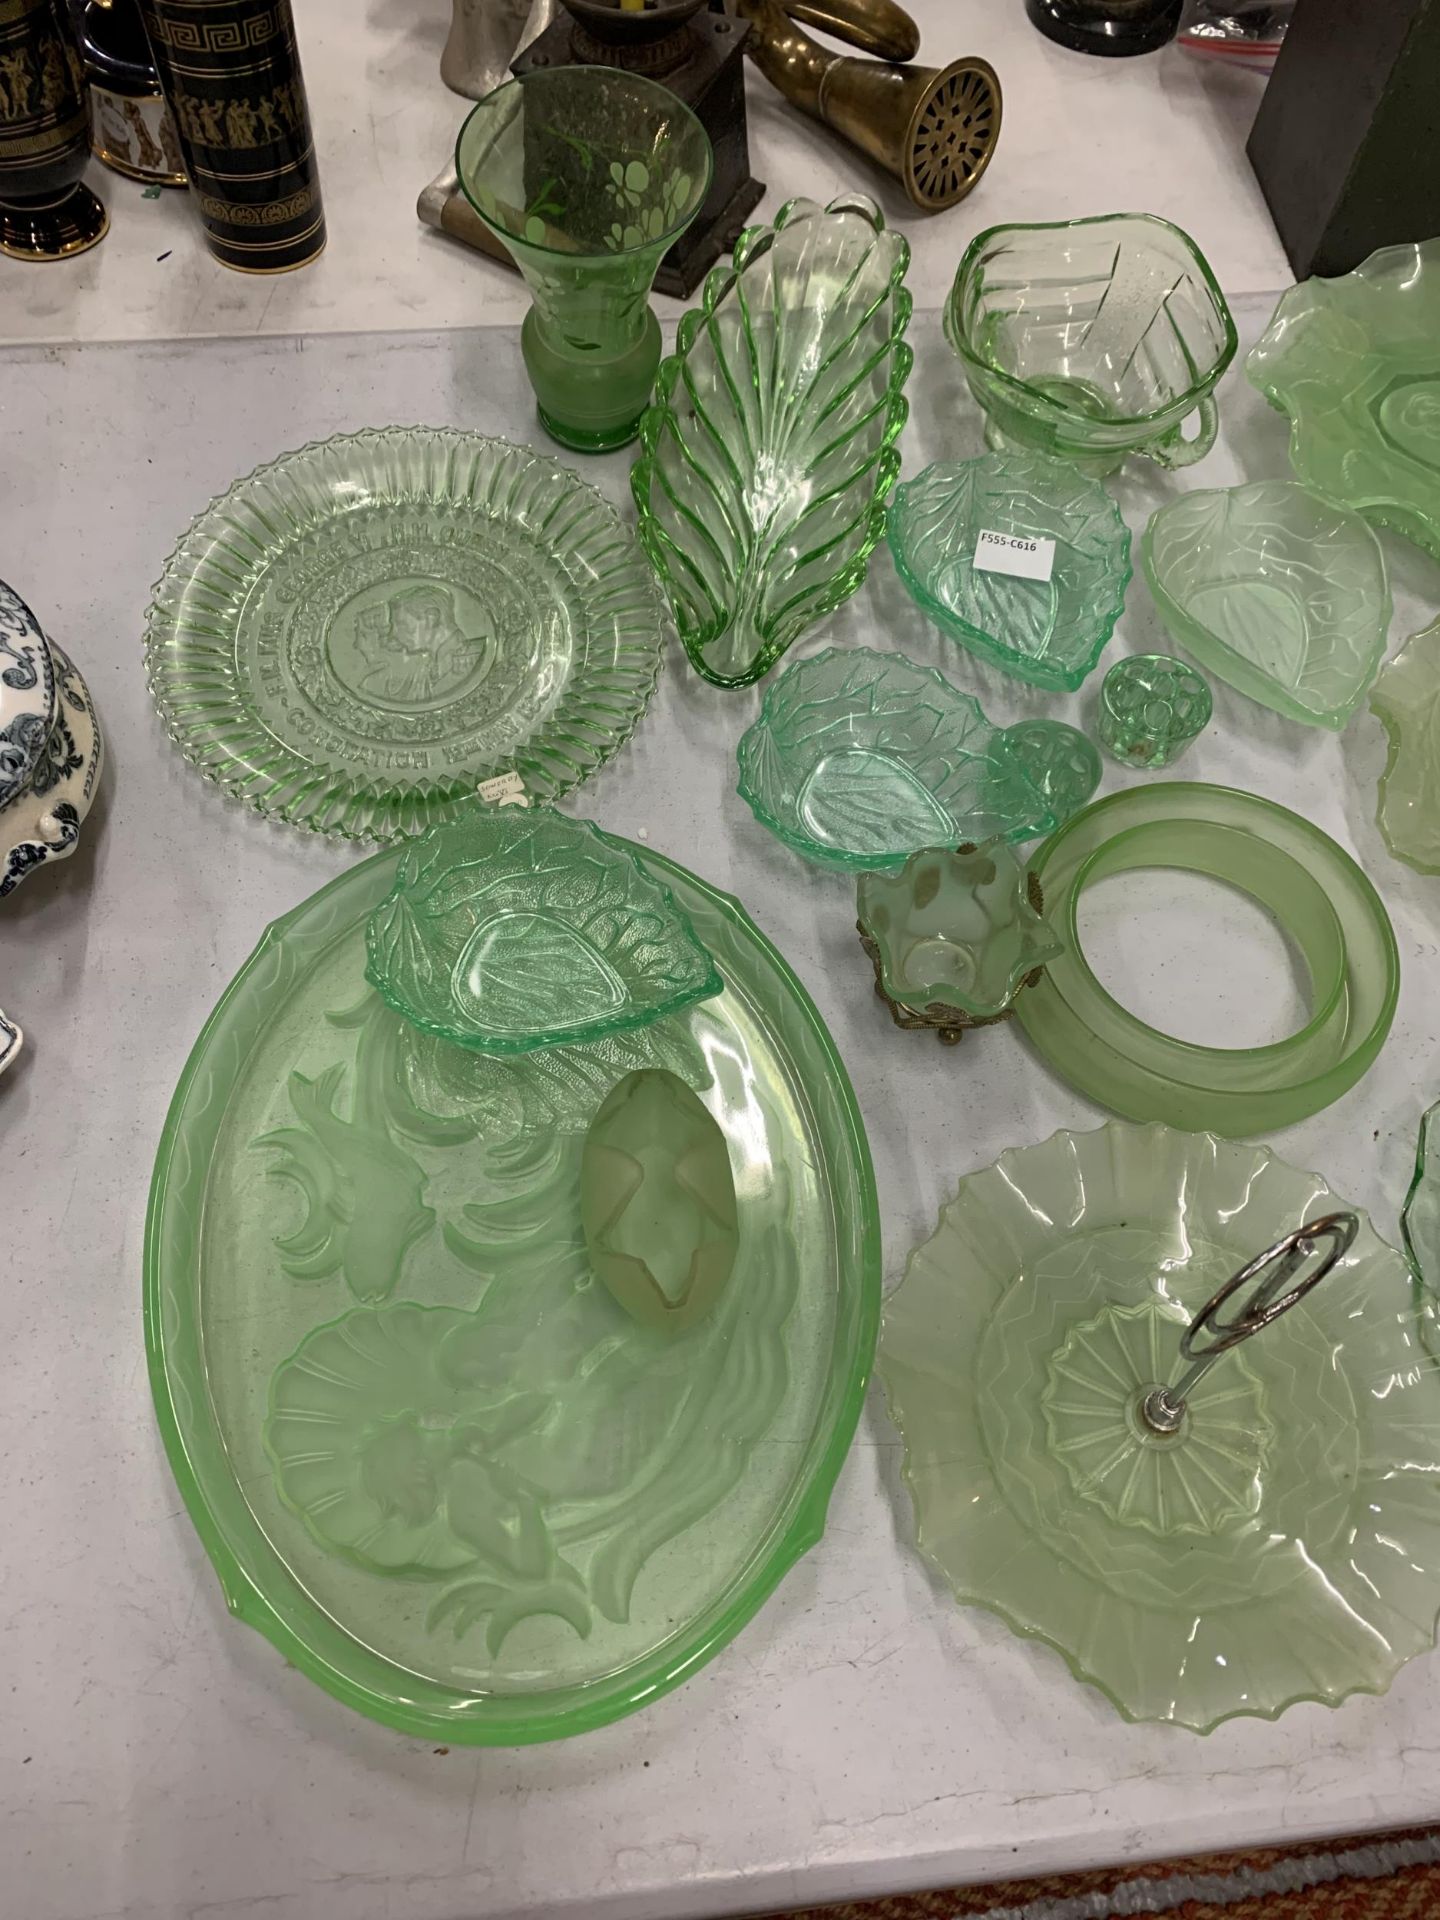 A LARGE AMOUNT OF GREEN GLASSWARE TO INCLUDE LEAF SHAPED BOWLS, PATTERNED PLATES, BOWLS, PLATES, ETC - Image 2 of 4